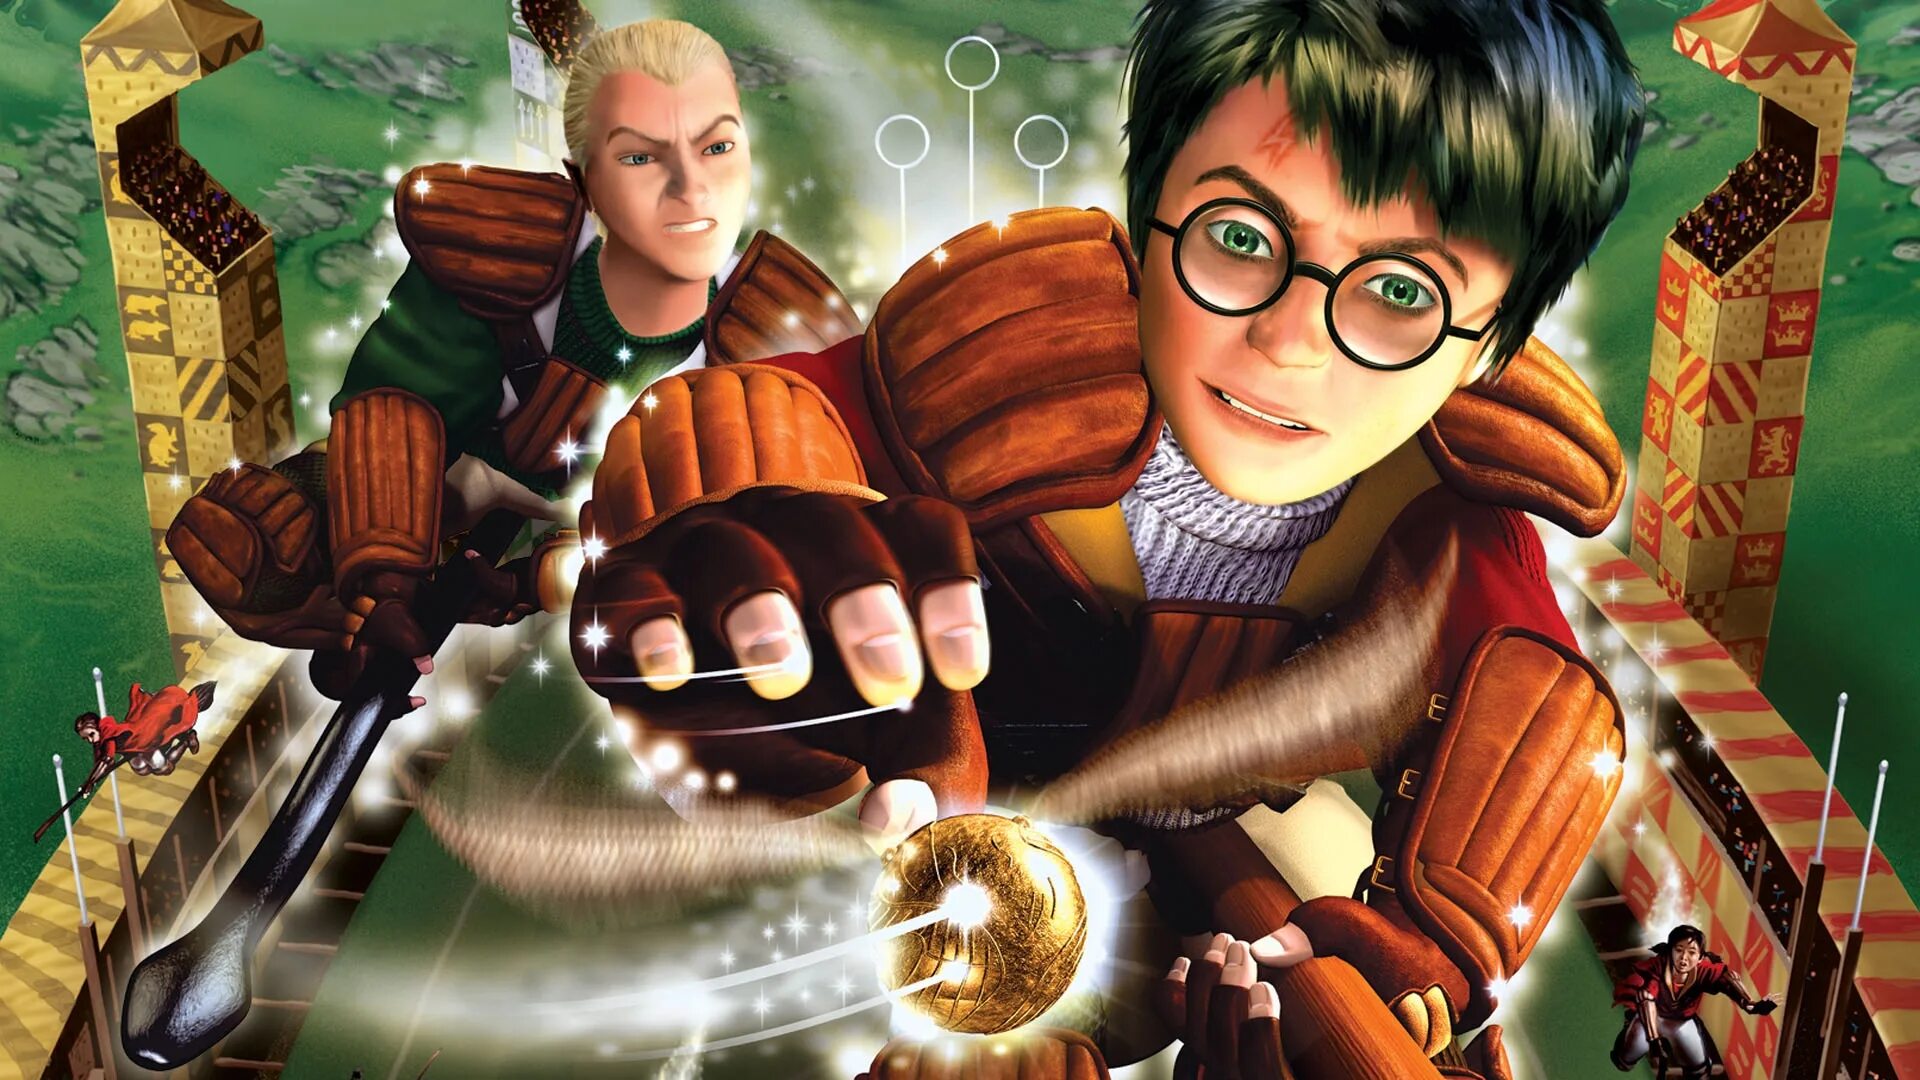 Quidditch cup. Harry Potter Quidditch World Cup. Harry Potter: Quidditch World Cup (2003 г.). Harry Potter: Quidditch World Cup игра.